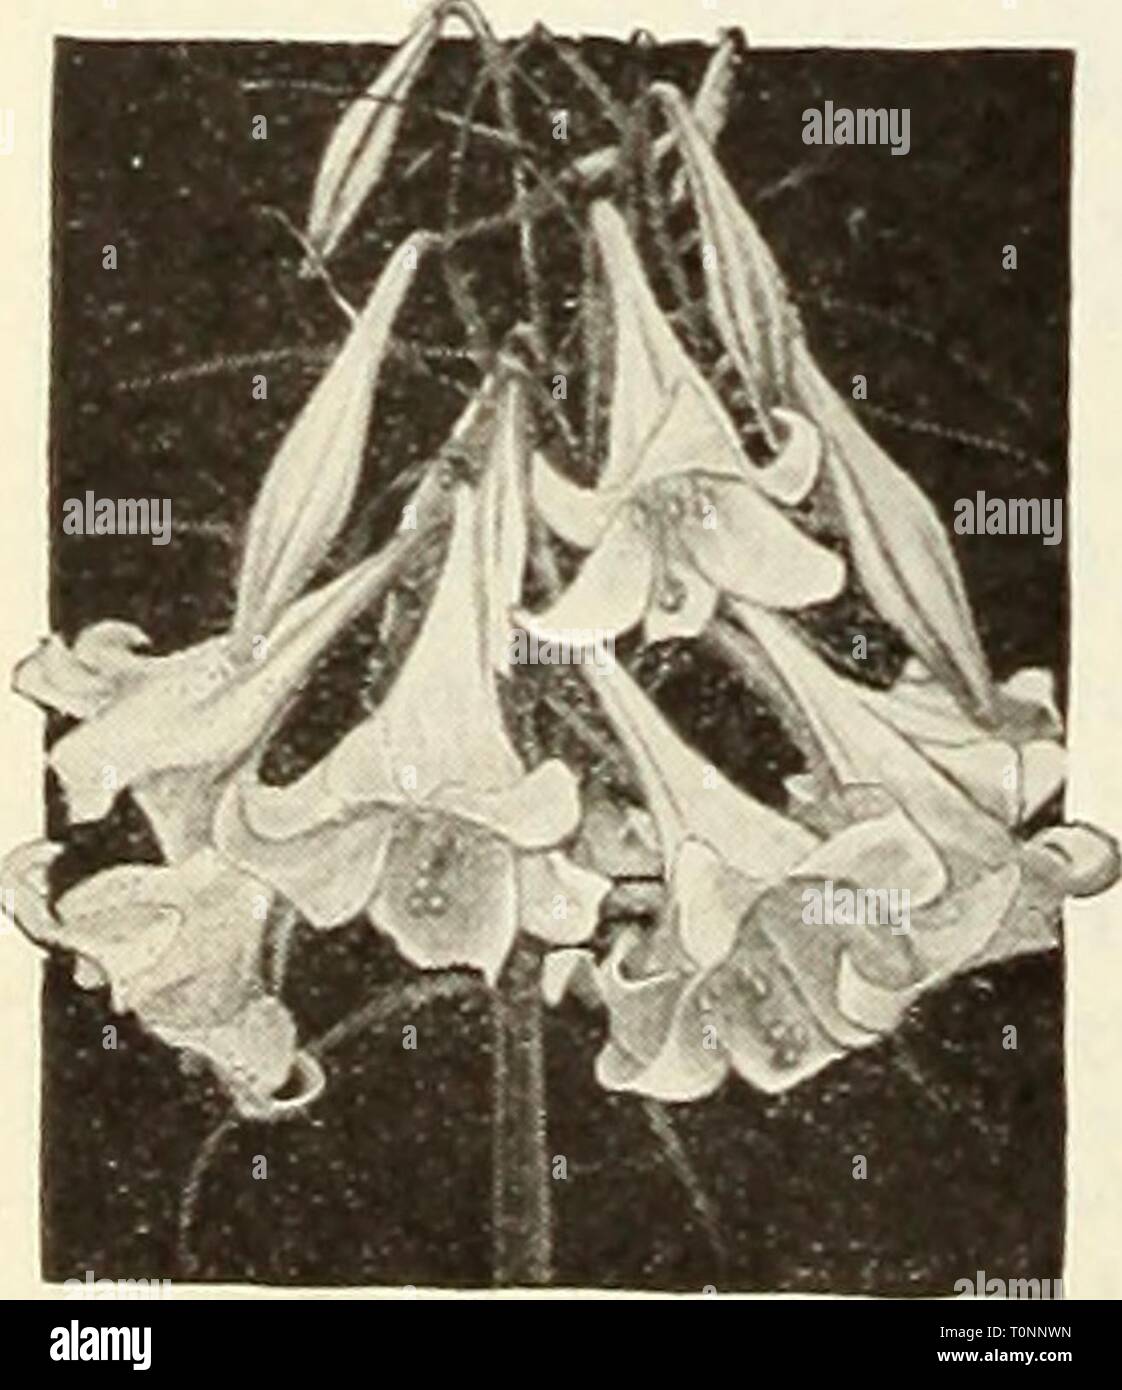 Dreer's bulbs  plants, shrubs, Dreer's bulbs : plants, shrubs, and seeds for fall planting  dreersbulbsplant1936henr Year: 1936  Lilium canil i Madonna 1 ' ^^ '^' -^ j^^t^'^'' Lilium elegans    Planting Lily Bulbs Please note the delivery date for the dif- ferent varieties which depends upon the time the bulbs mature. Unless you are prepared to care for those received late we suggest that you buy in spring as the bulbs are so perish- able that we cannot accept their return. Cover the soil where Lilies are to be pkuited with hay, straw, etc., to keep the frost out until planting time. Philippin Stock Photo